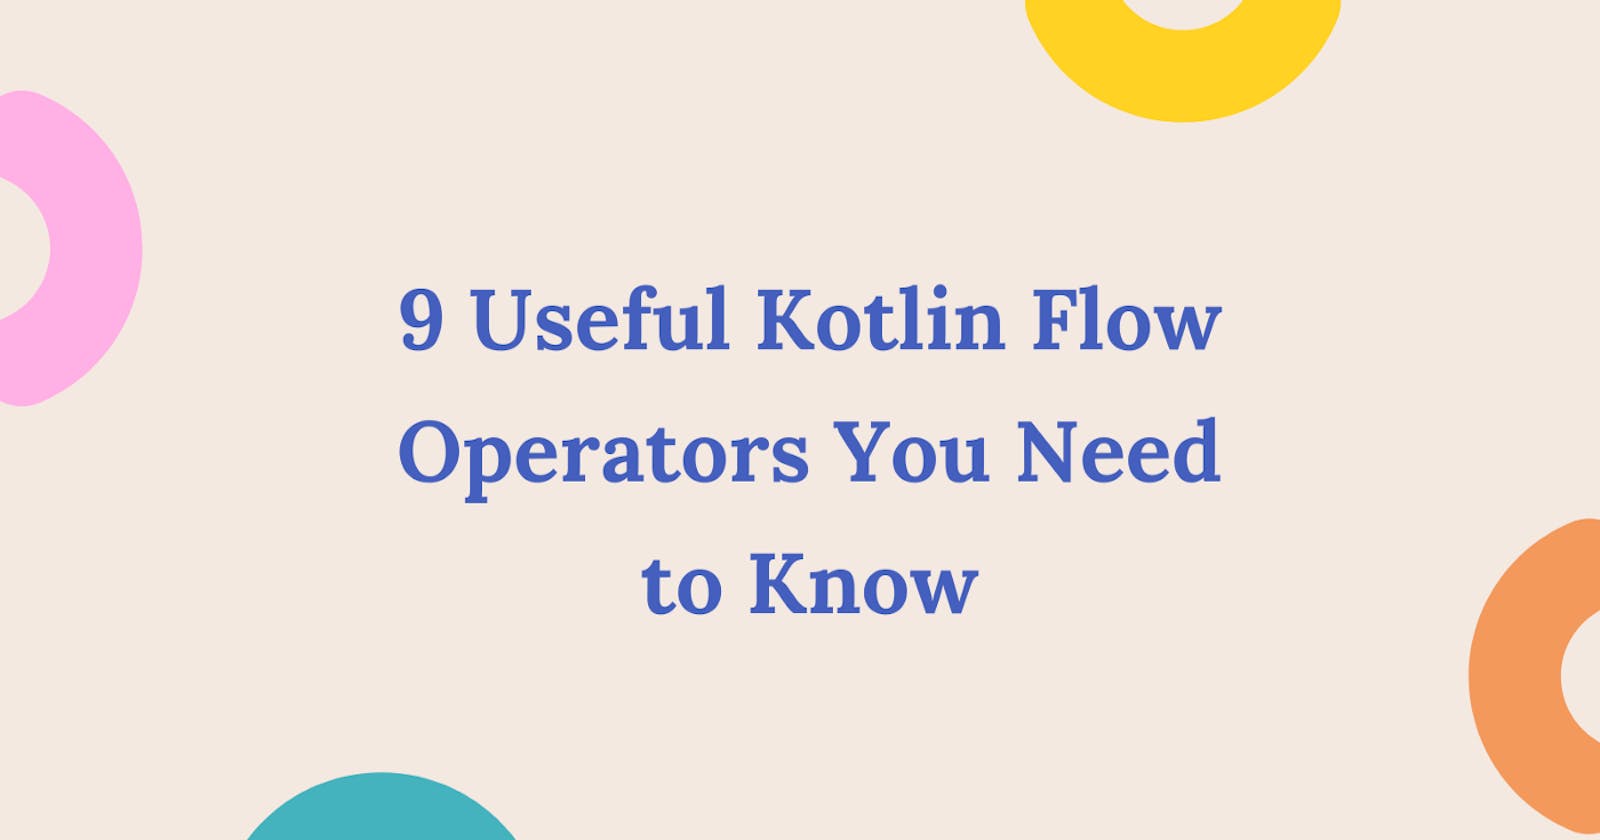 Android — 9 Useful Kotlin Flow Operators You Need to Know